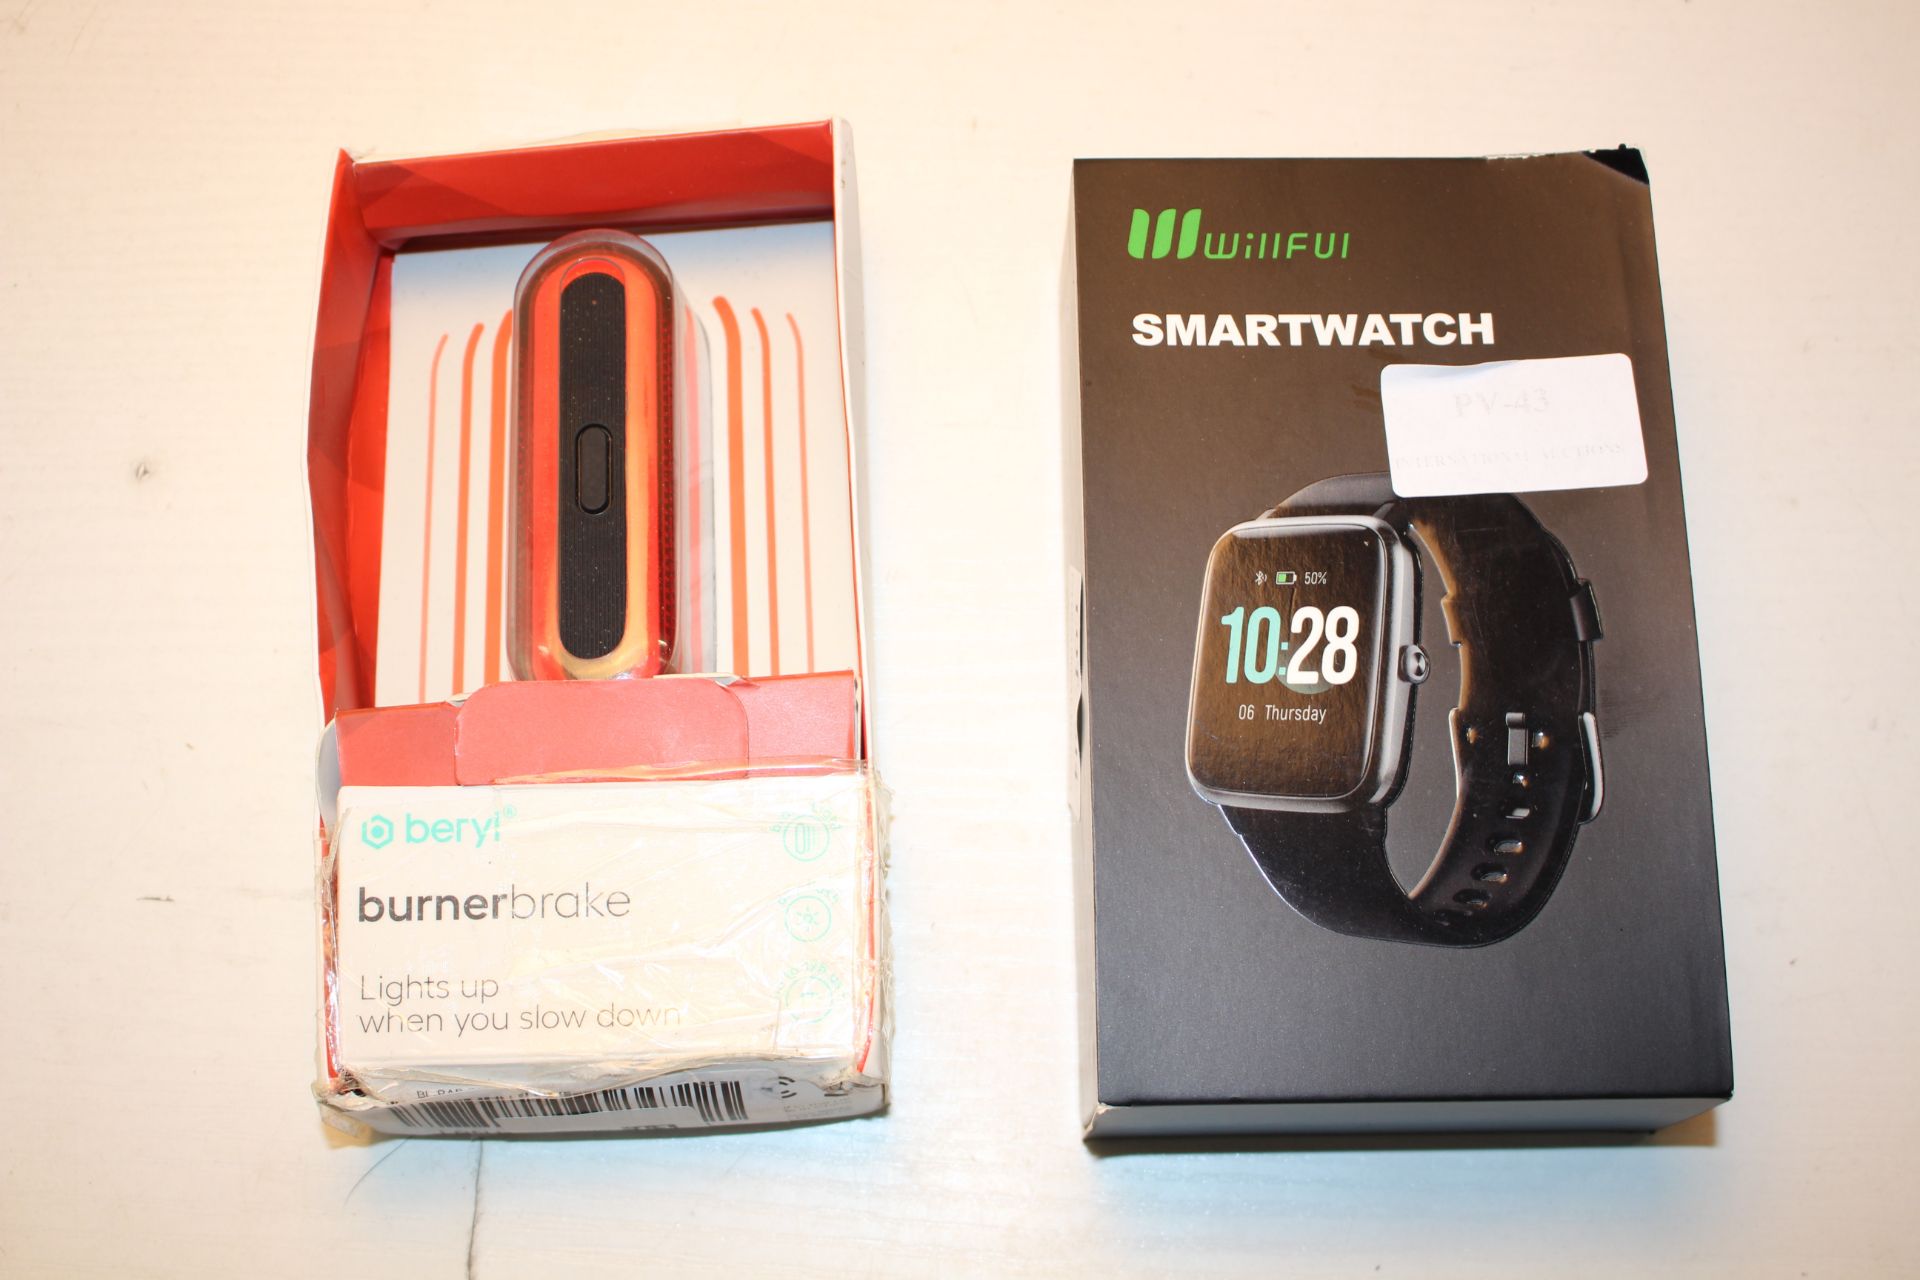 2X BOXED ITEMS TO INCLUDE WILLFUI SMARTWATCH & BERYL BURNER BRAKE Condition ReportAppraisal